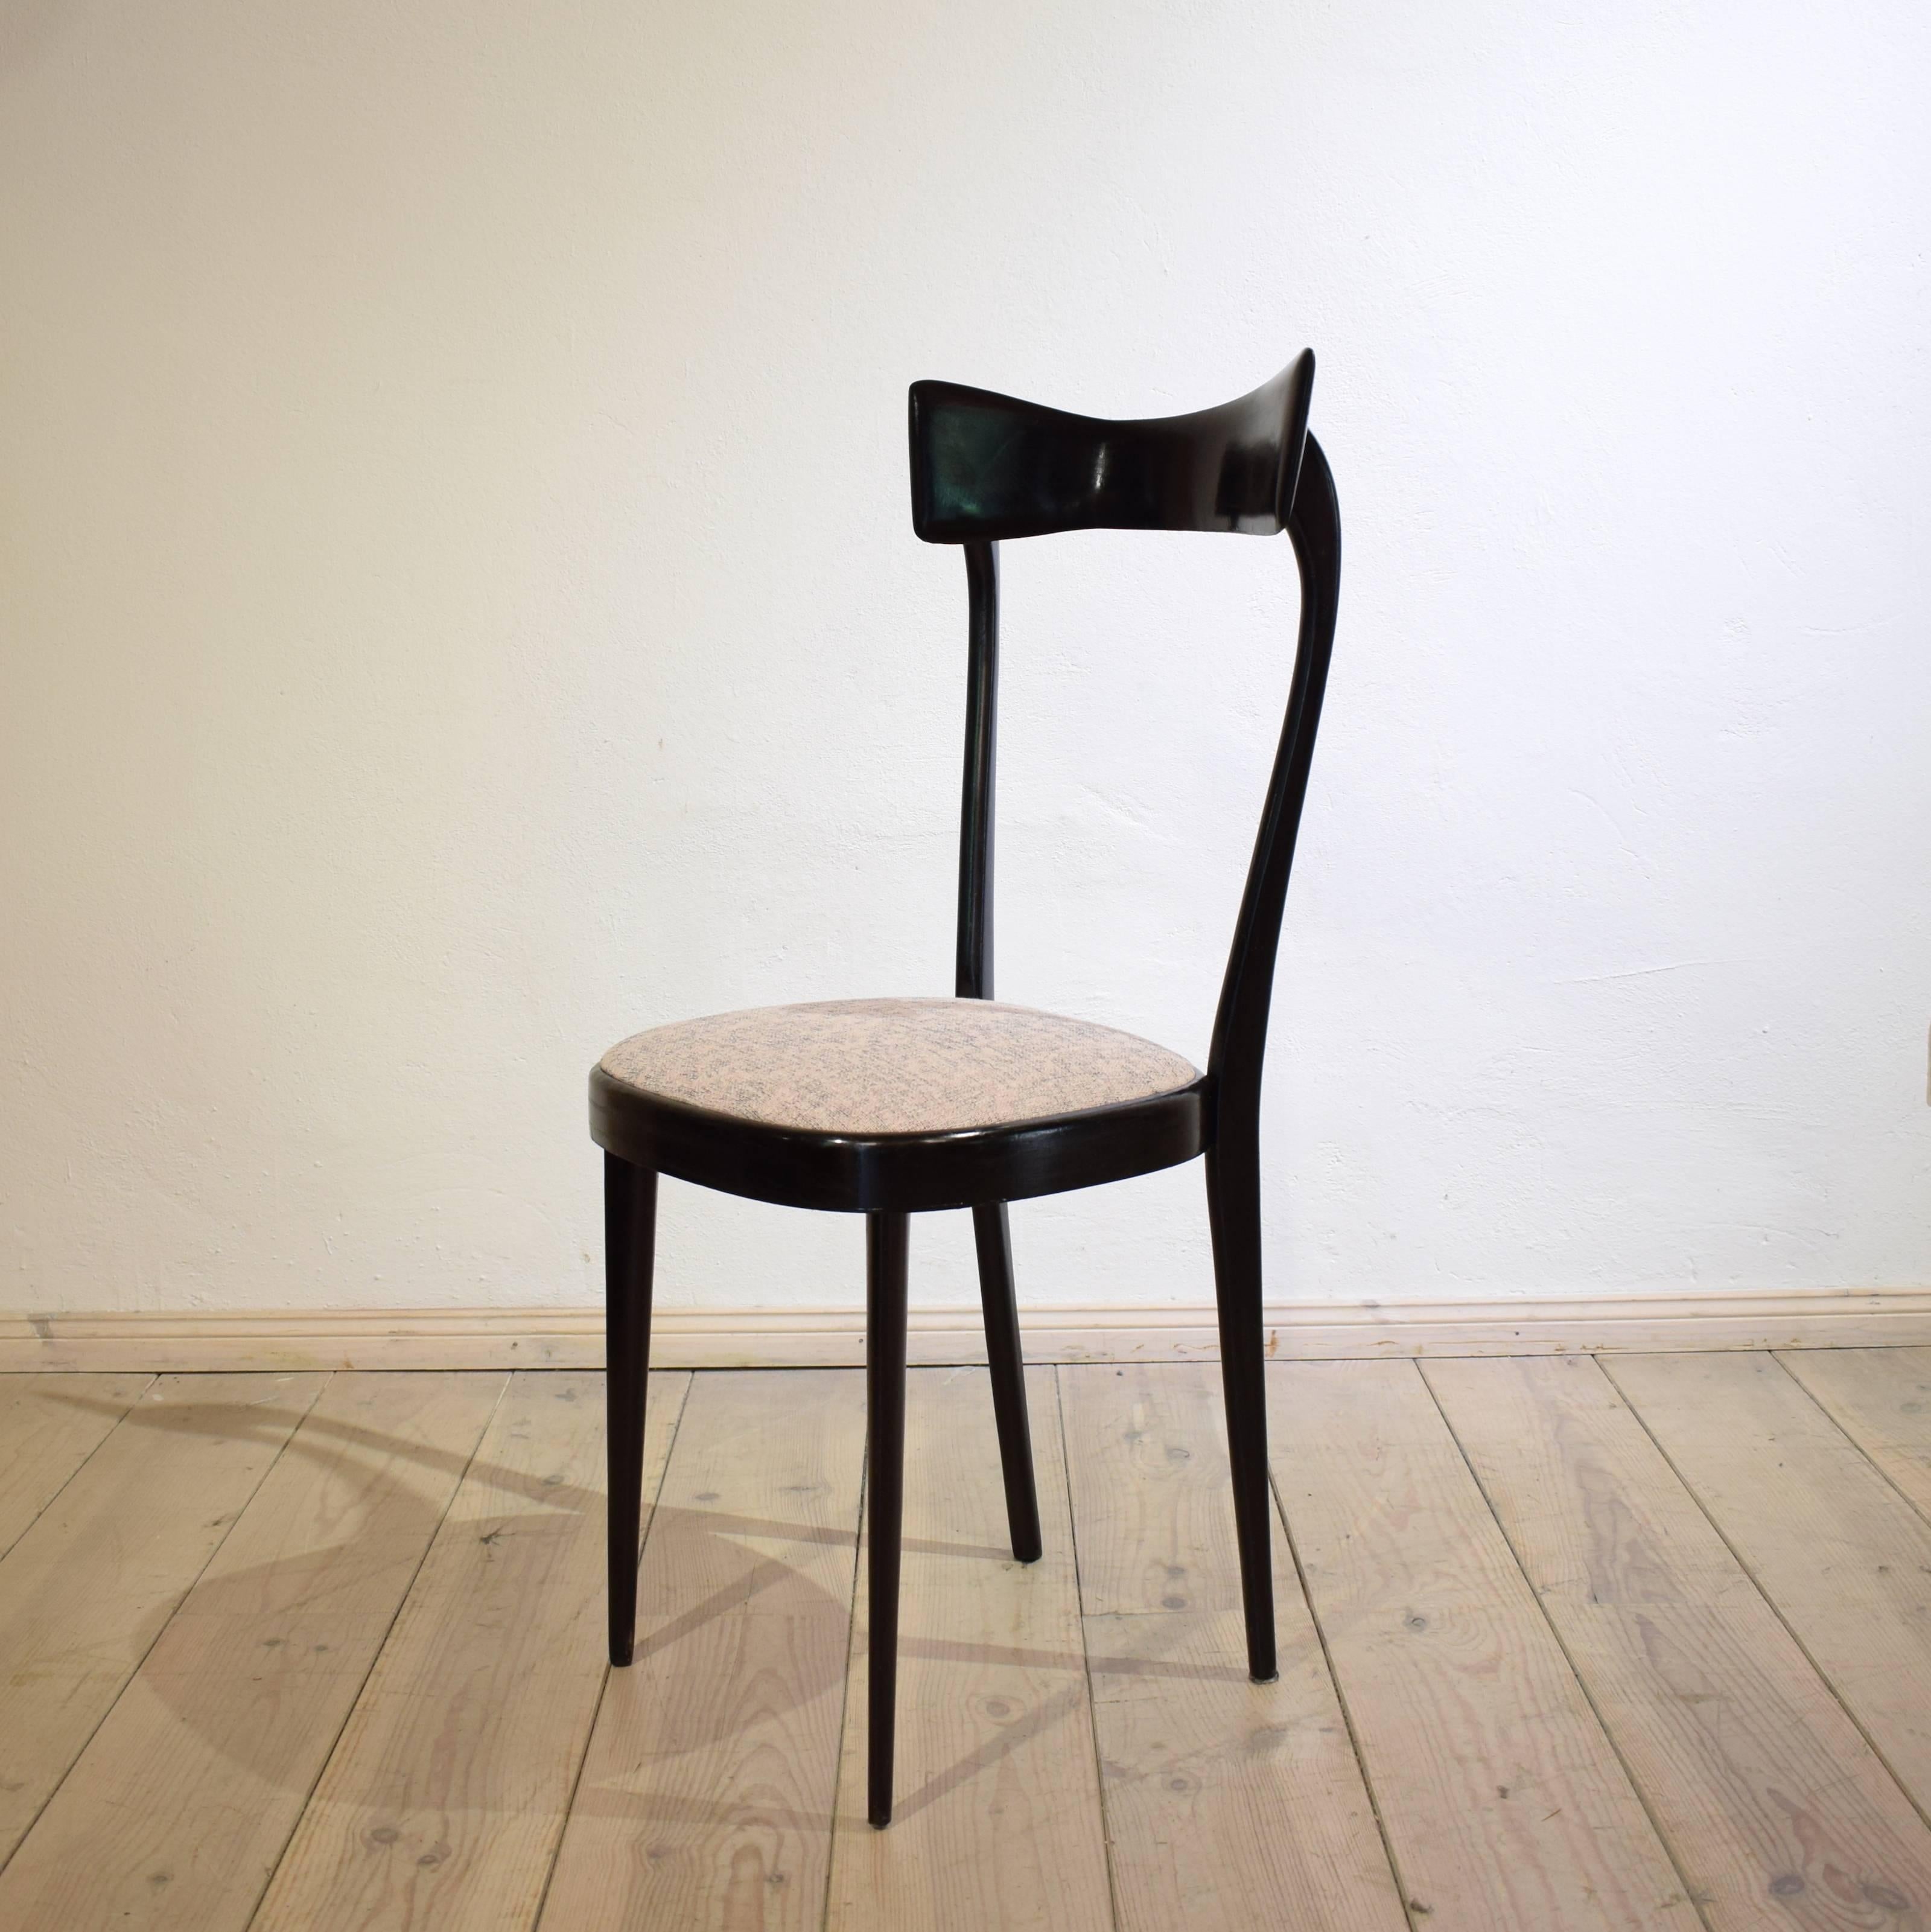 Mid-20th Century Set of Four Italian Midcentury Dining Chairs in the Manner of Ico Parisi, 1950